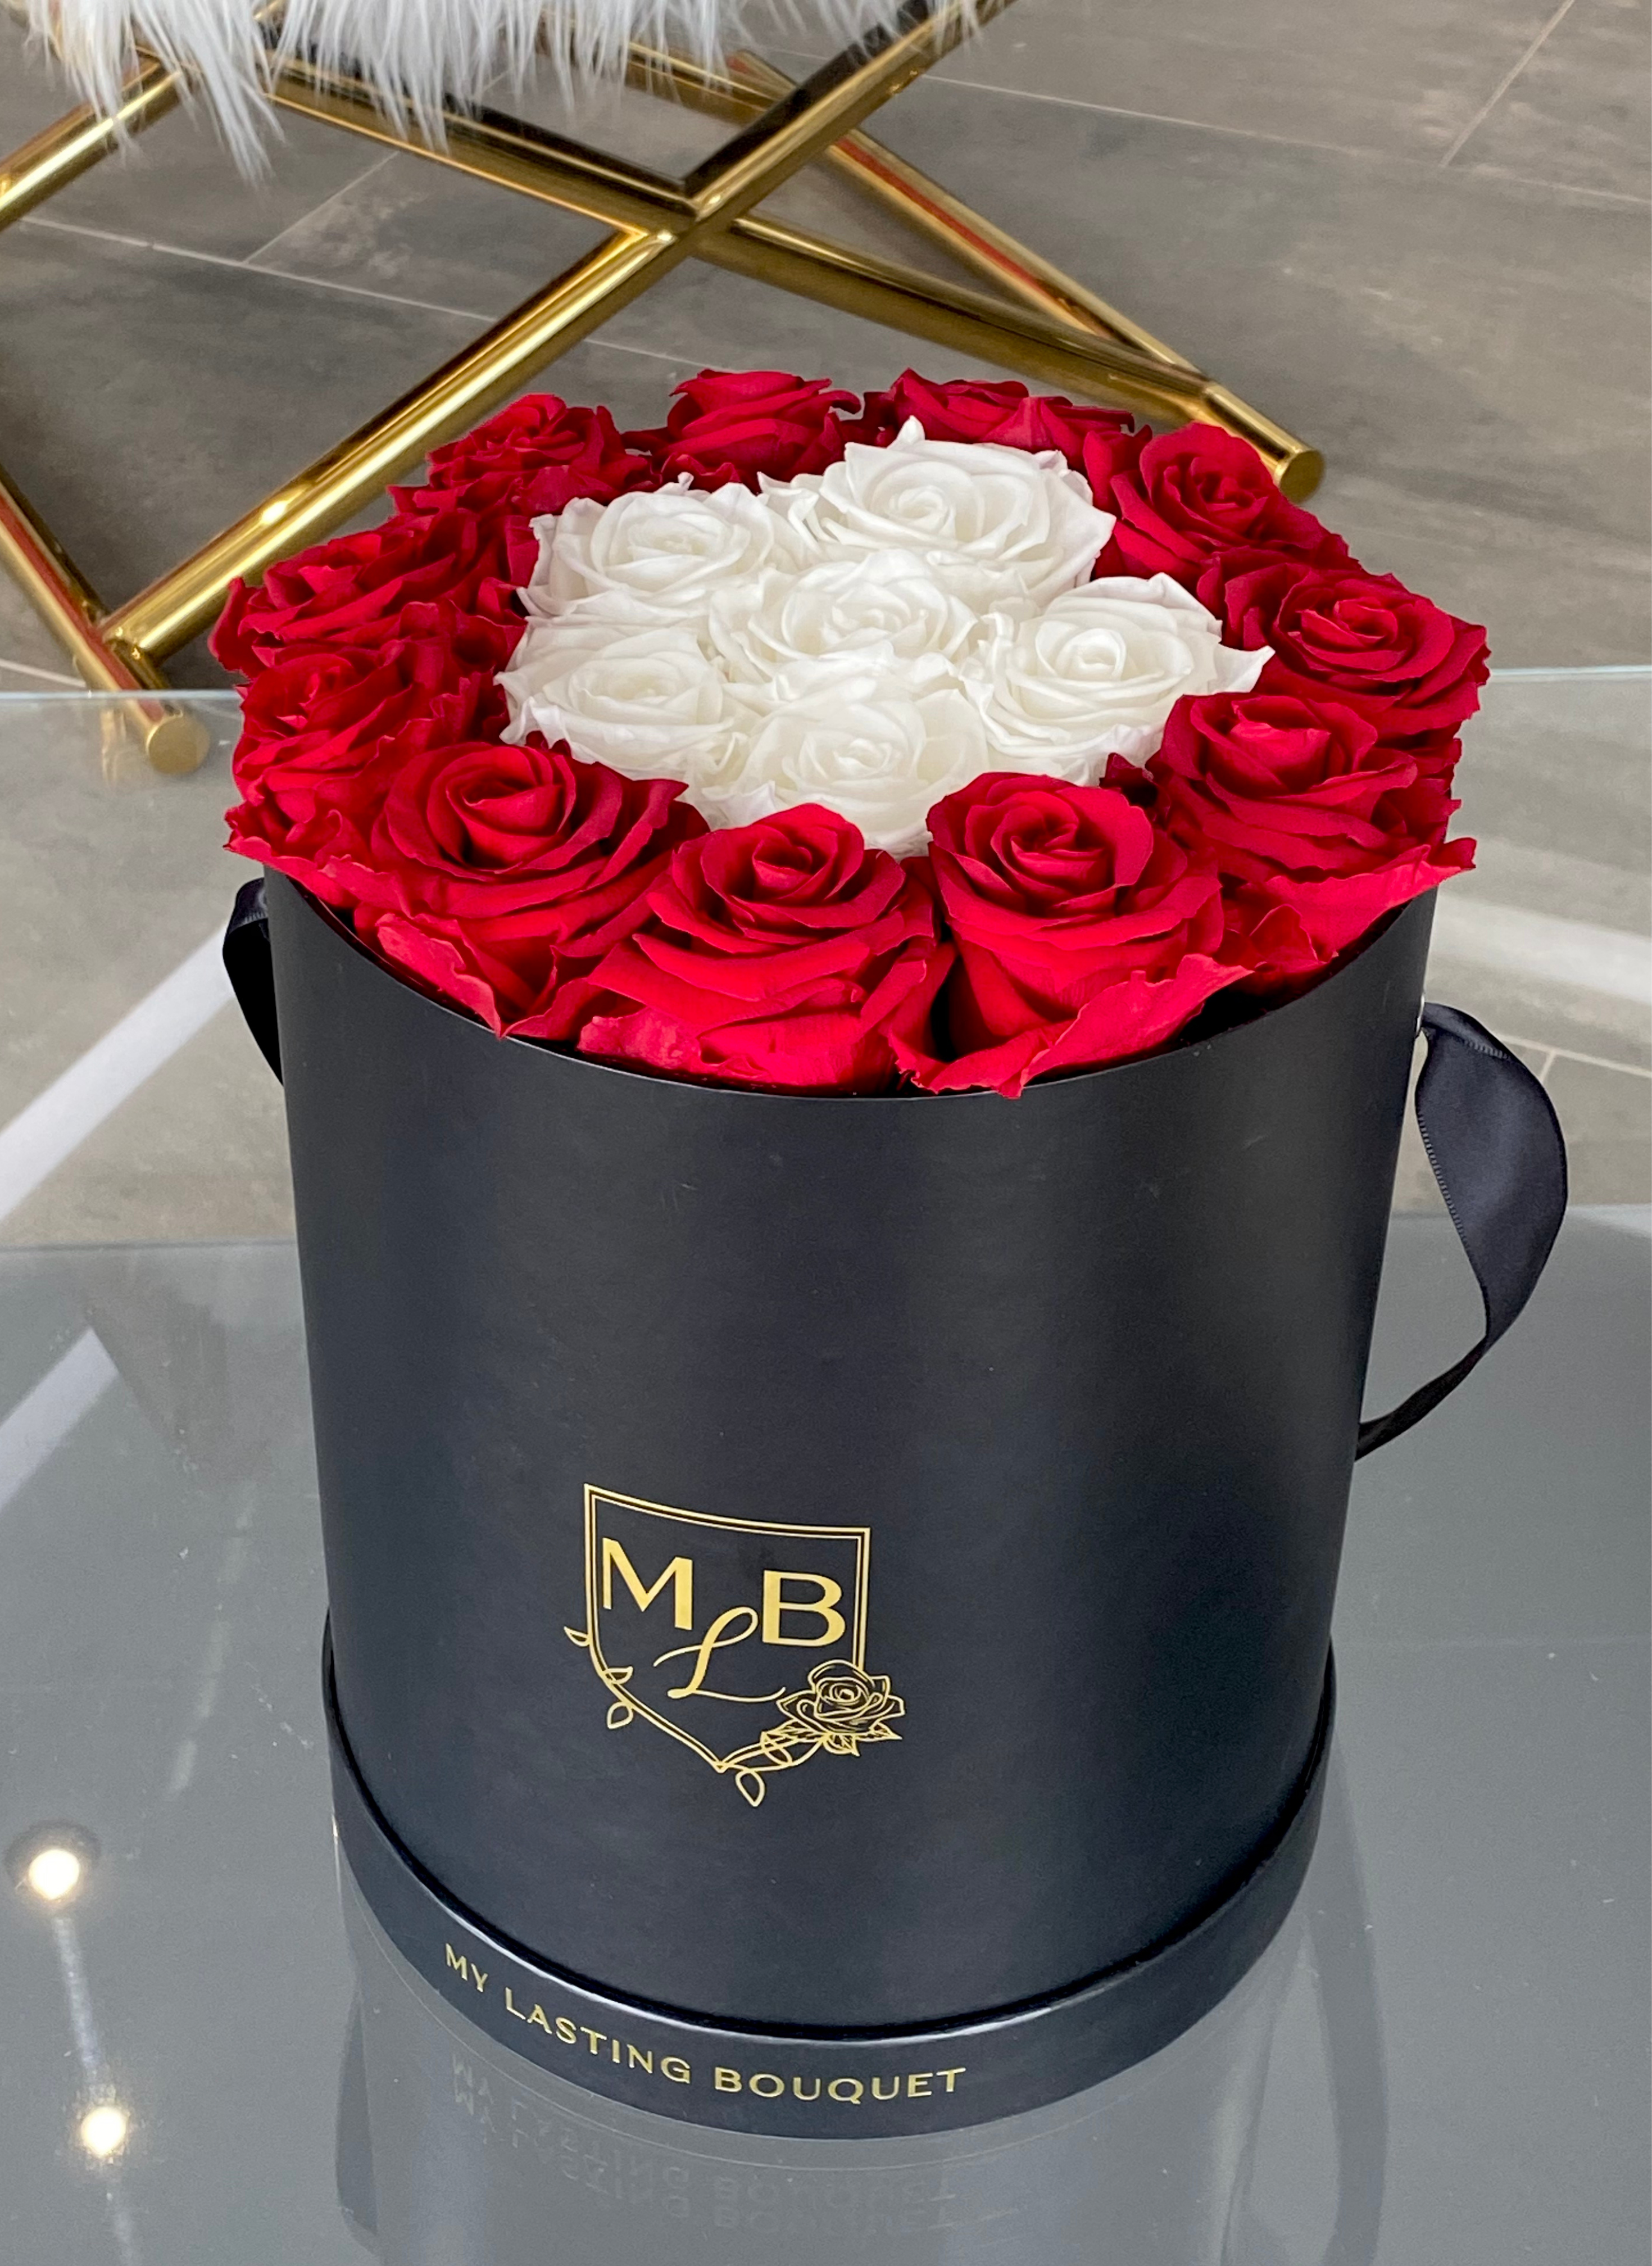 Round Rose Box- Red & White - My Lasting Bouquet